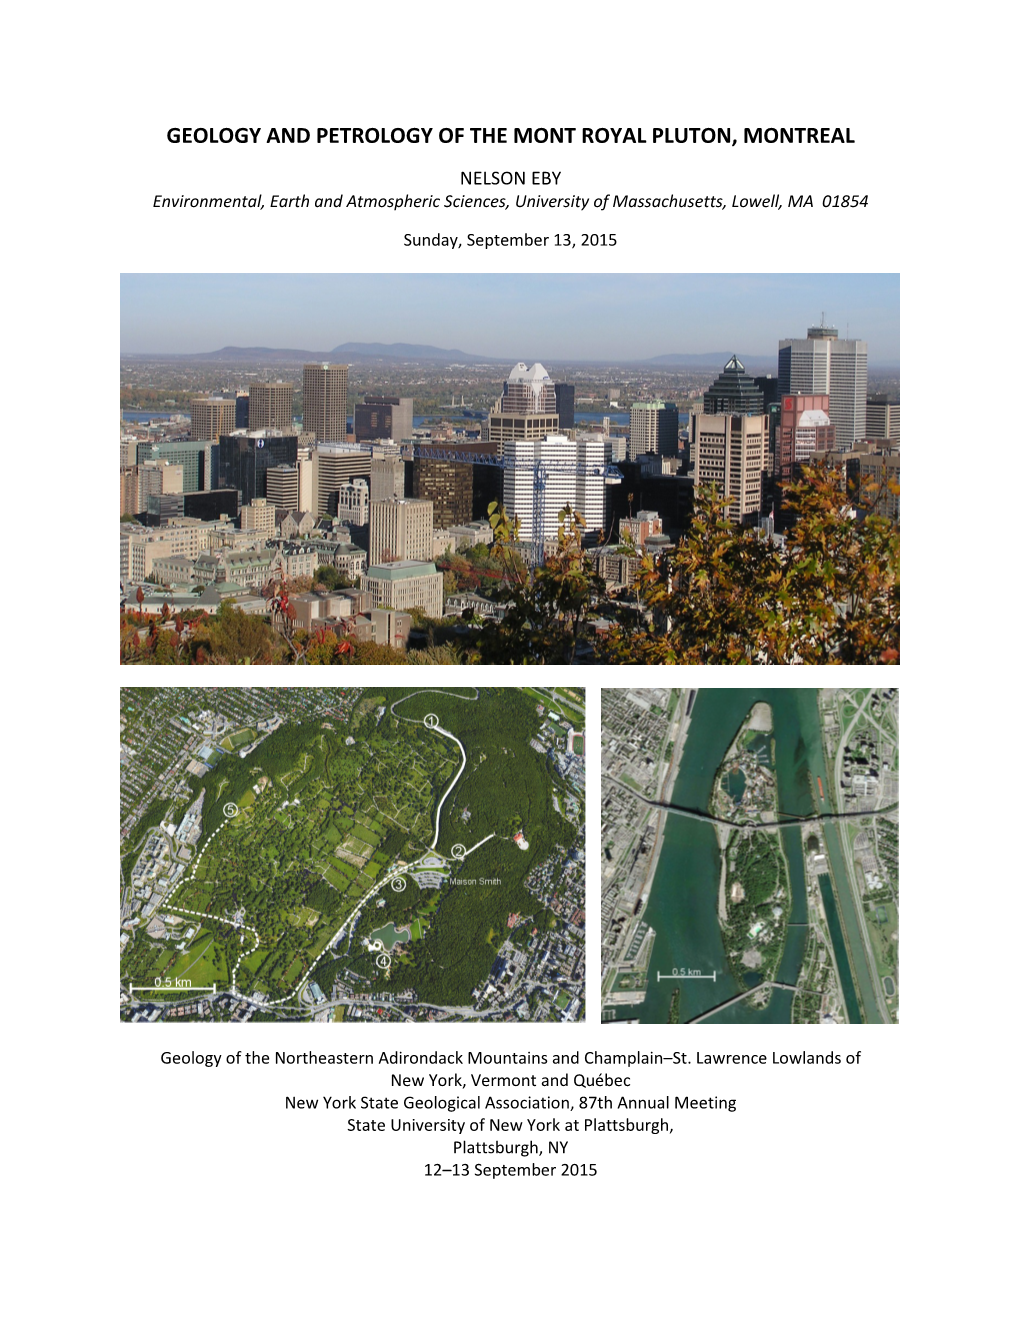 Geology and Petrology of the Mont Royal Pluton, Montreal